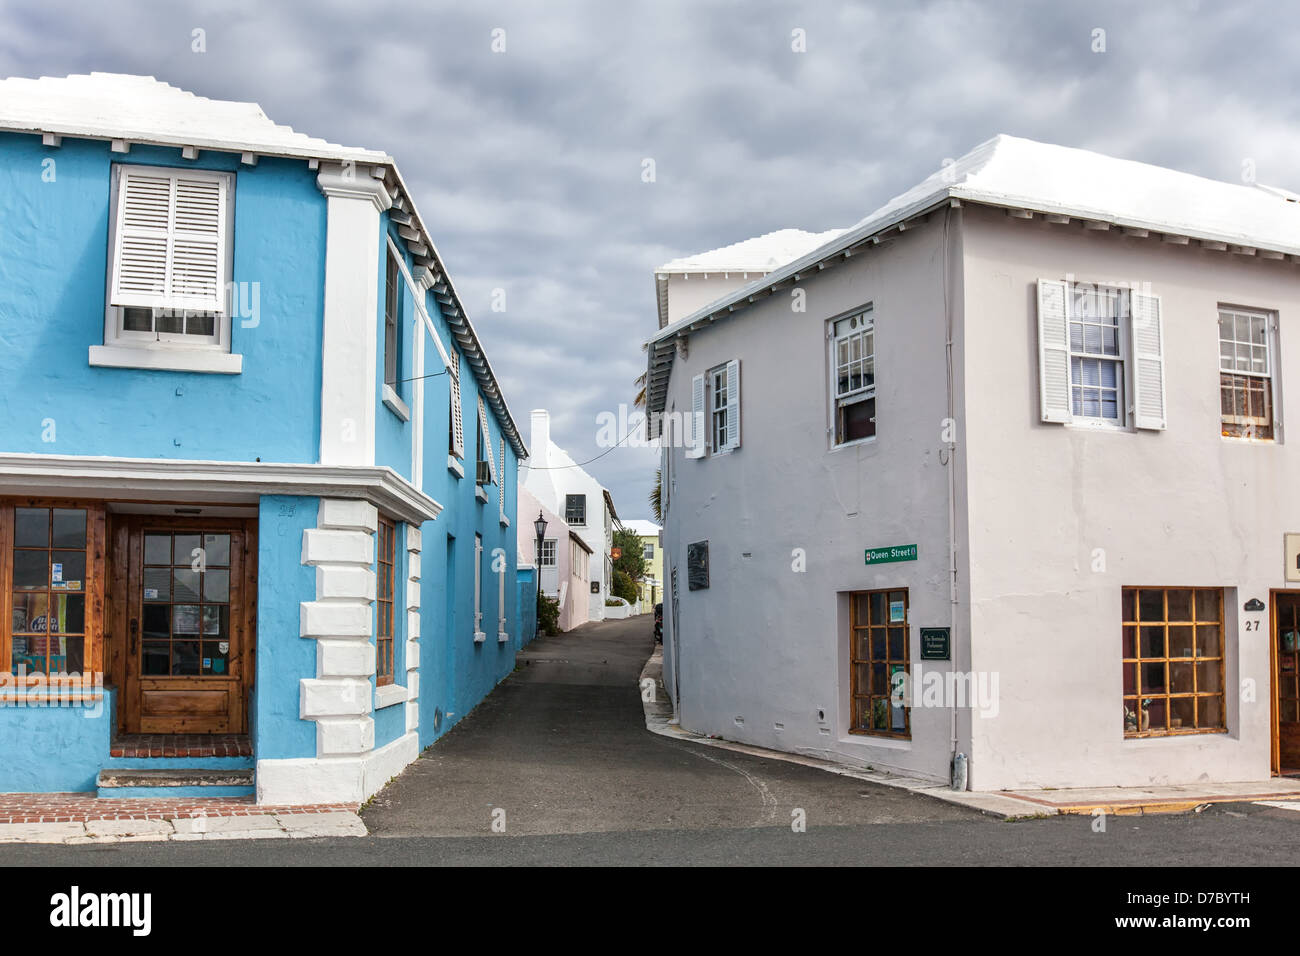 Buildings and side streets in the town of St. George's, Bermuda. Stock Photo